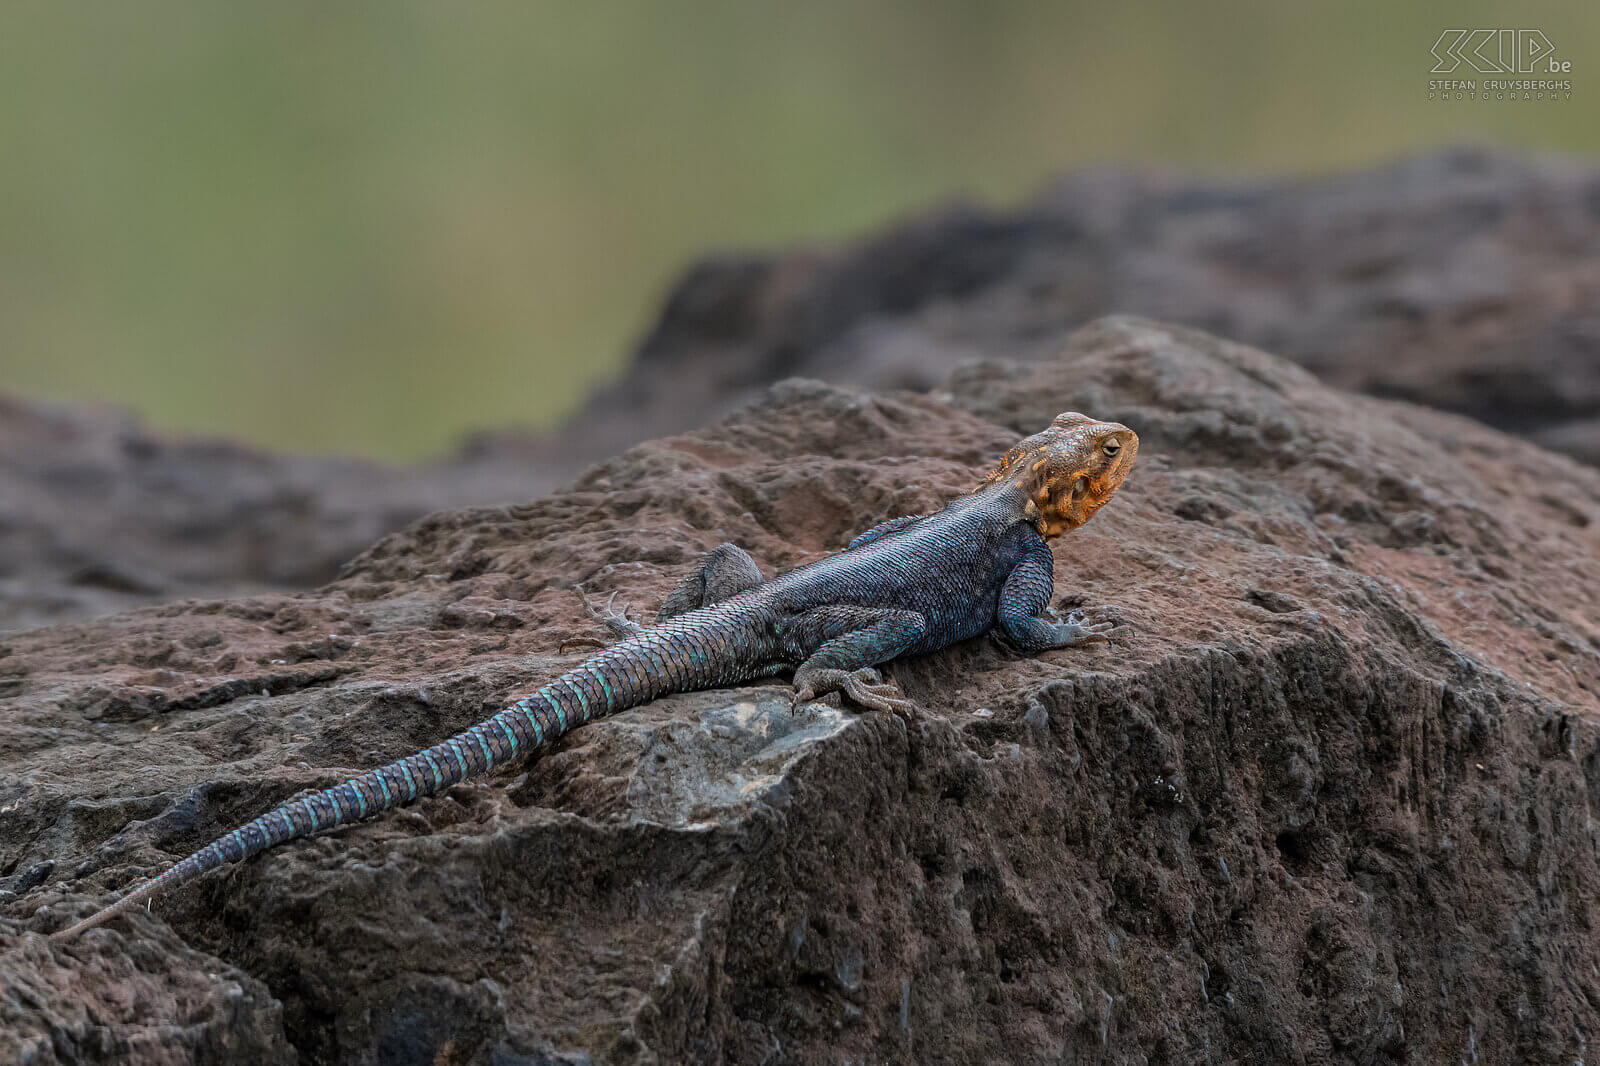 Nakuru NP - Kenya rock agama The Kenya rock agama (Agama agama) is one of the most colorful agamas and they mainly live in rocky environments. Stefan Cruysberghs